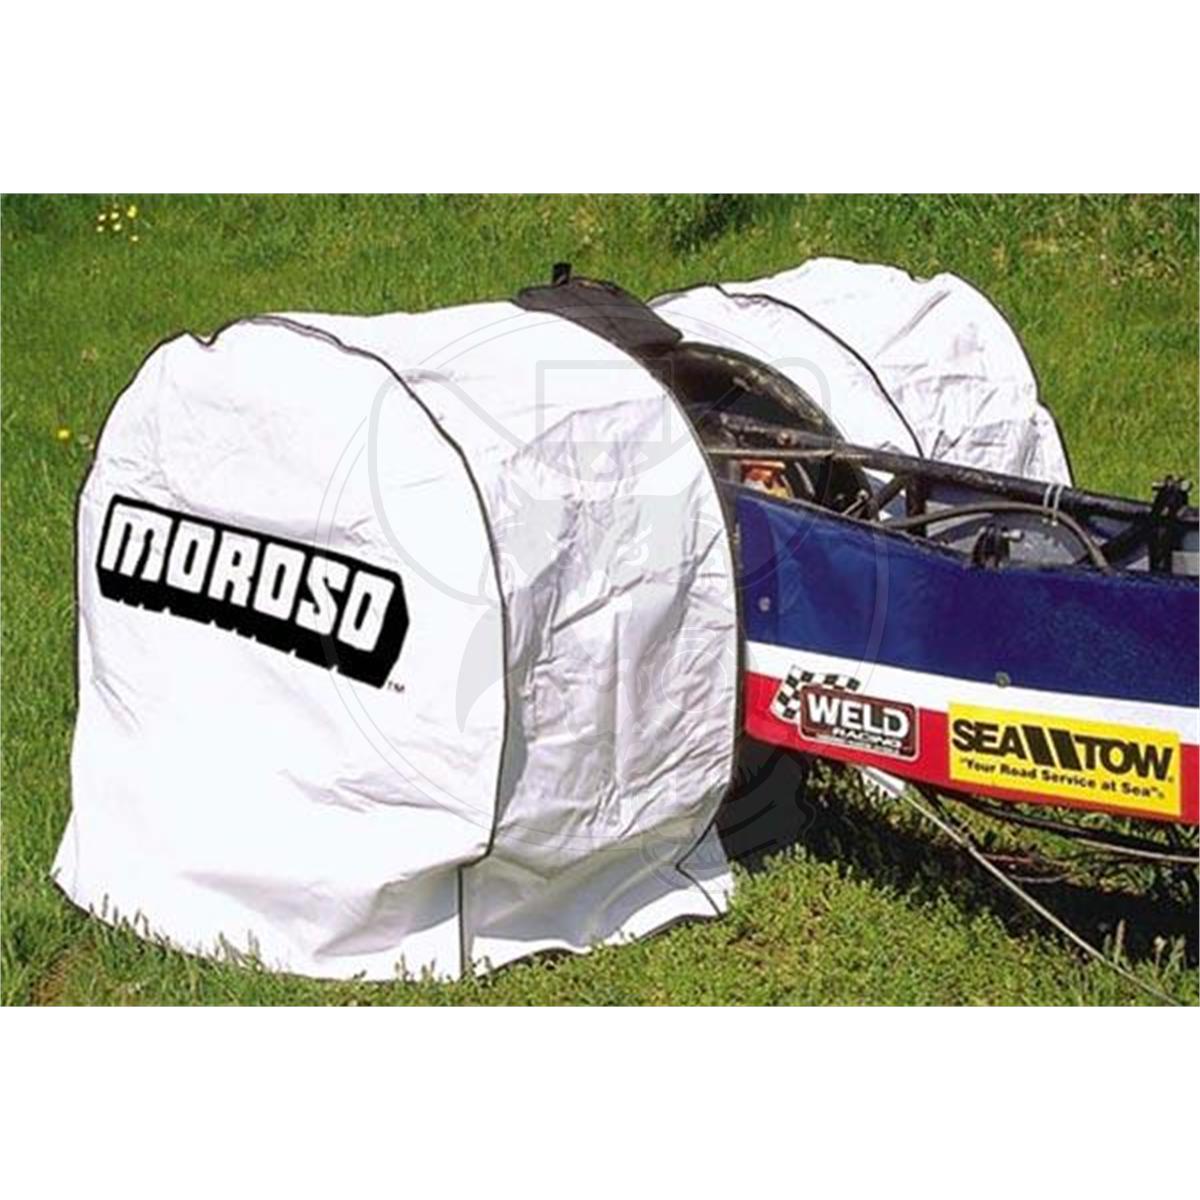 MOROSO TYRE COVER FITS UP TO 33.5" DIAMETER TO 17.5" WIDE